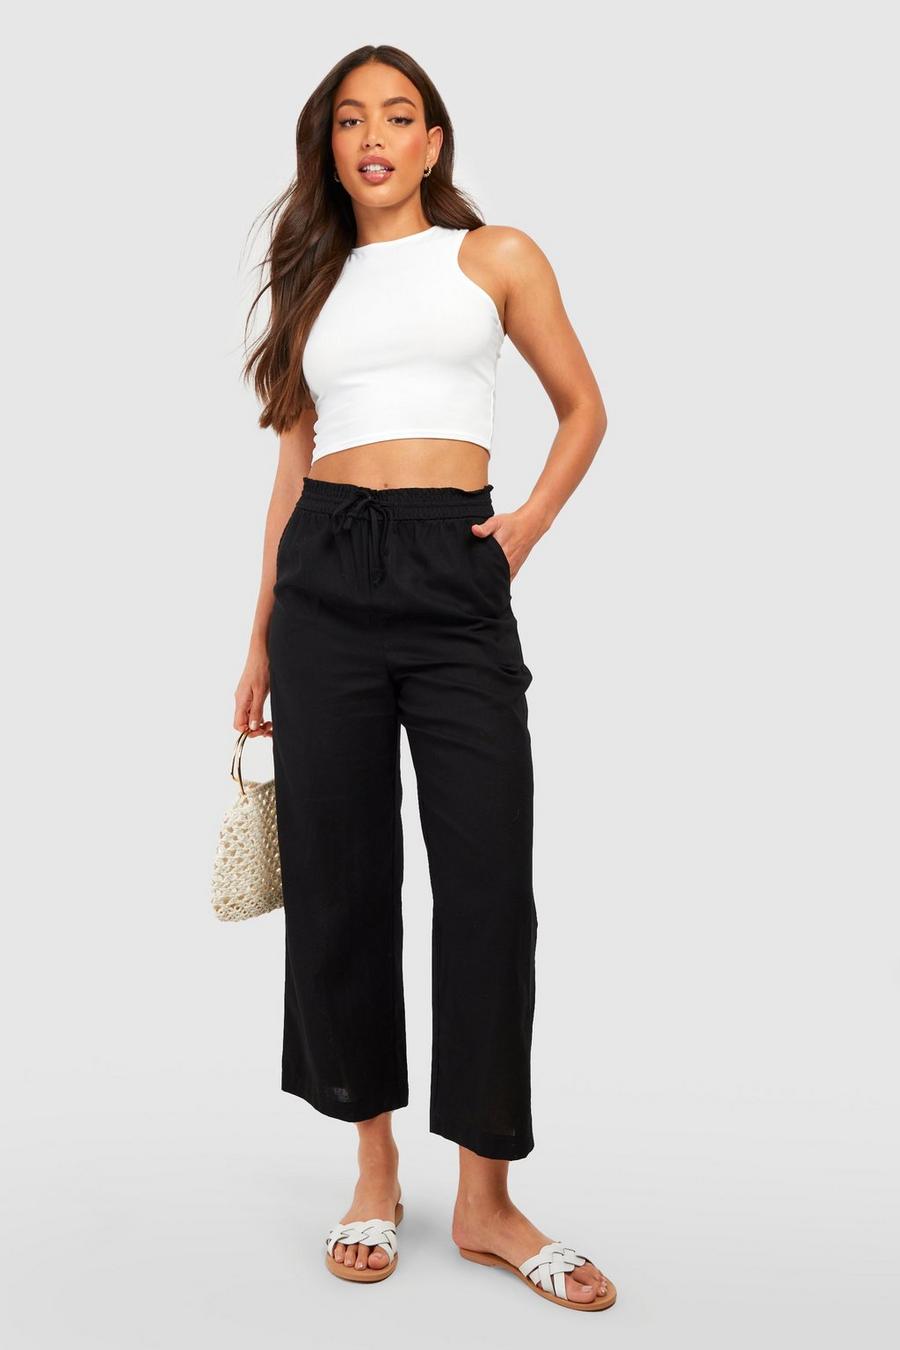 Culotte trousers COLOUR black - RESERVED - 737AB-99X